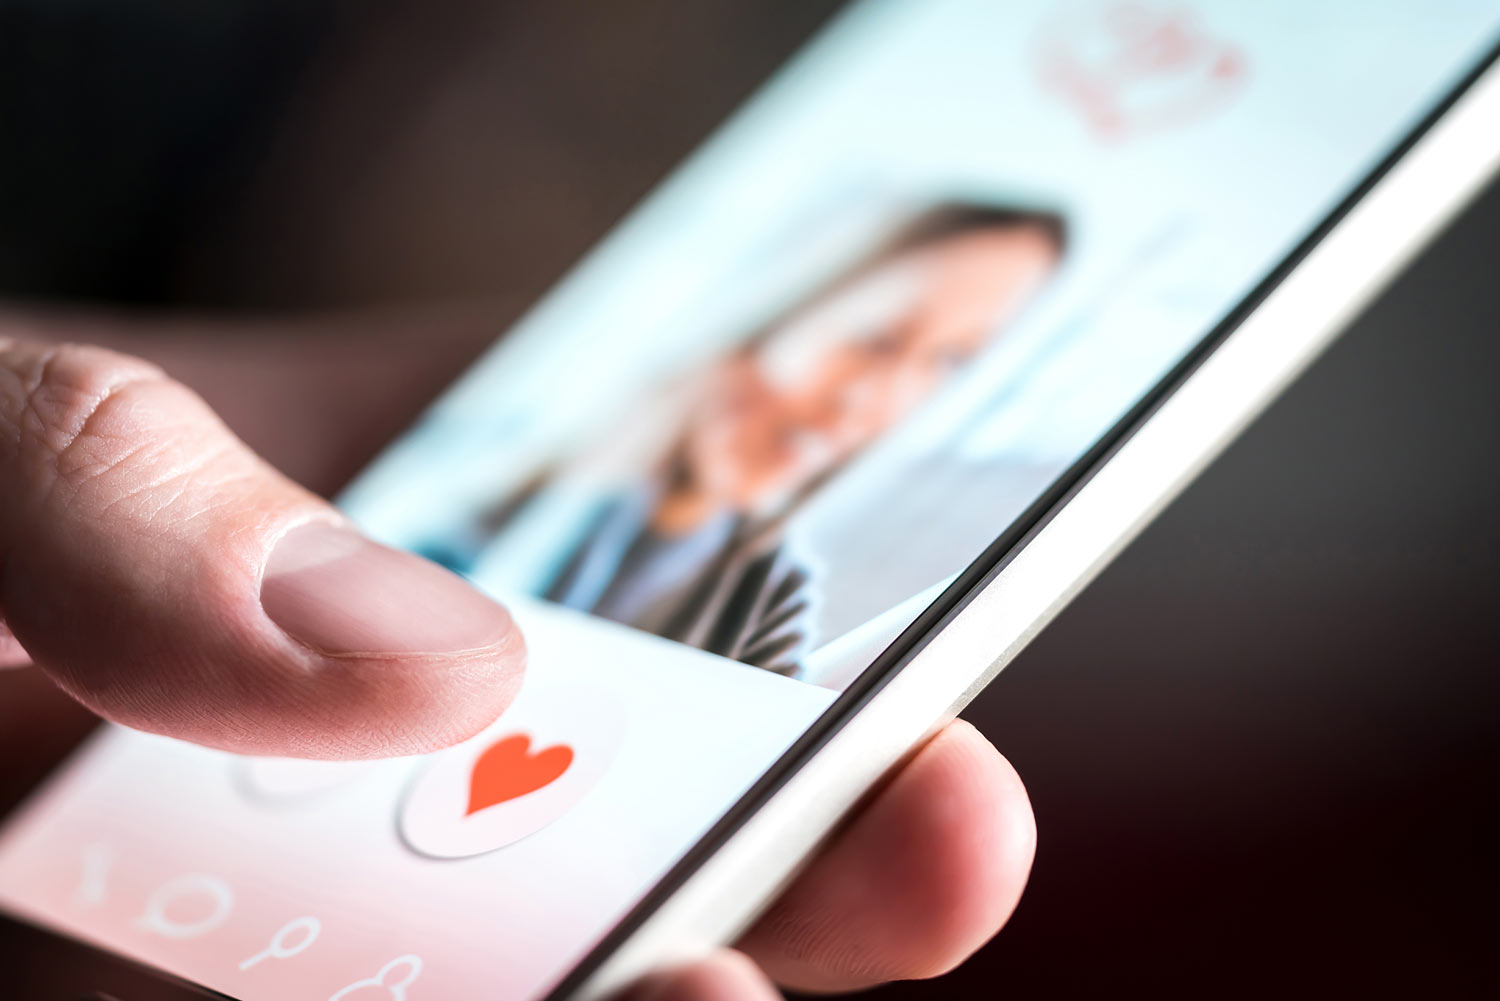 7 Ways To Avoid in Online Dating Meeting The Next Tinder Swindler